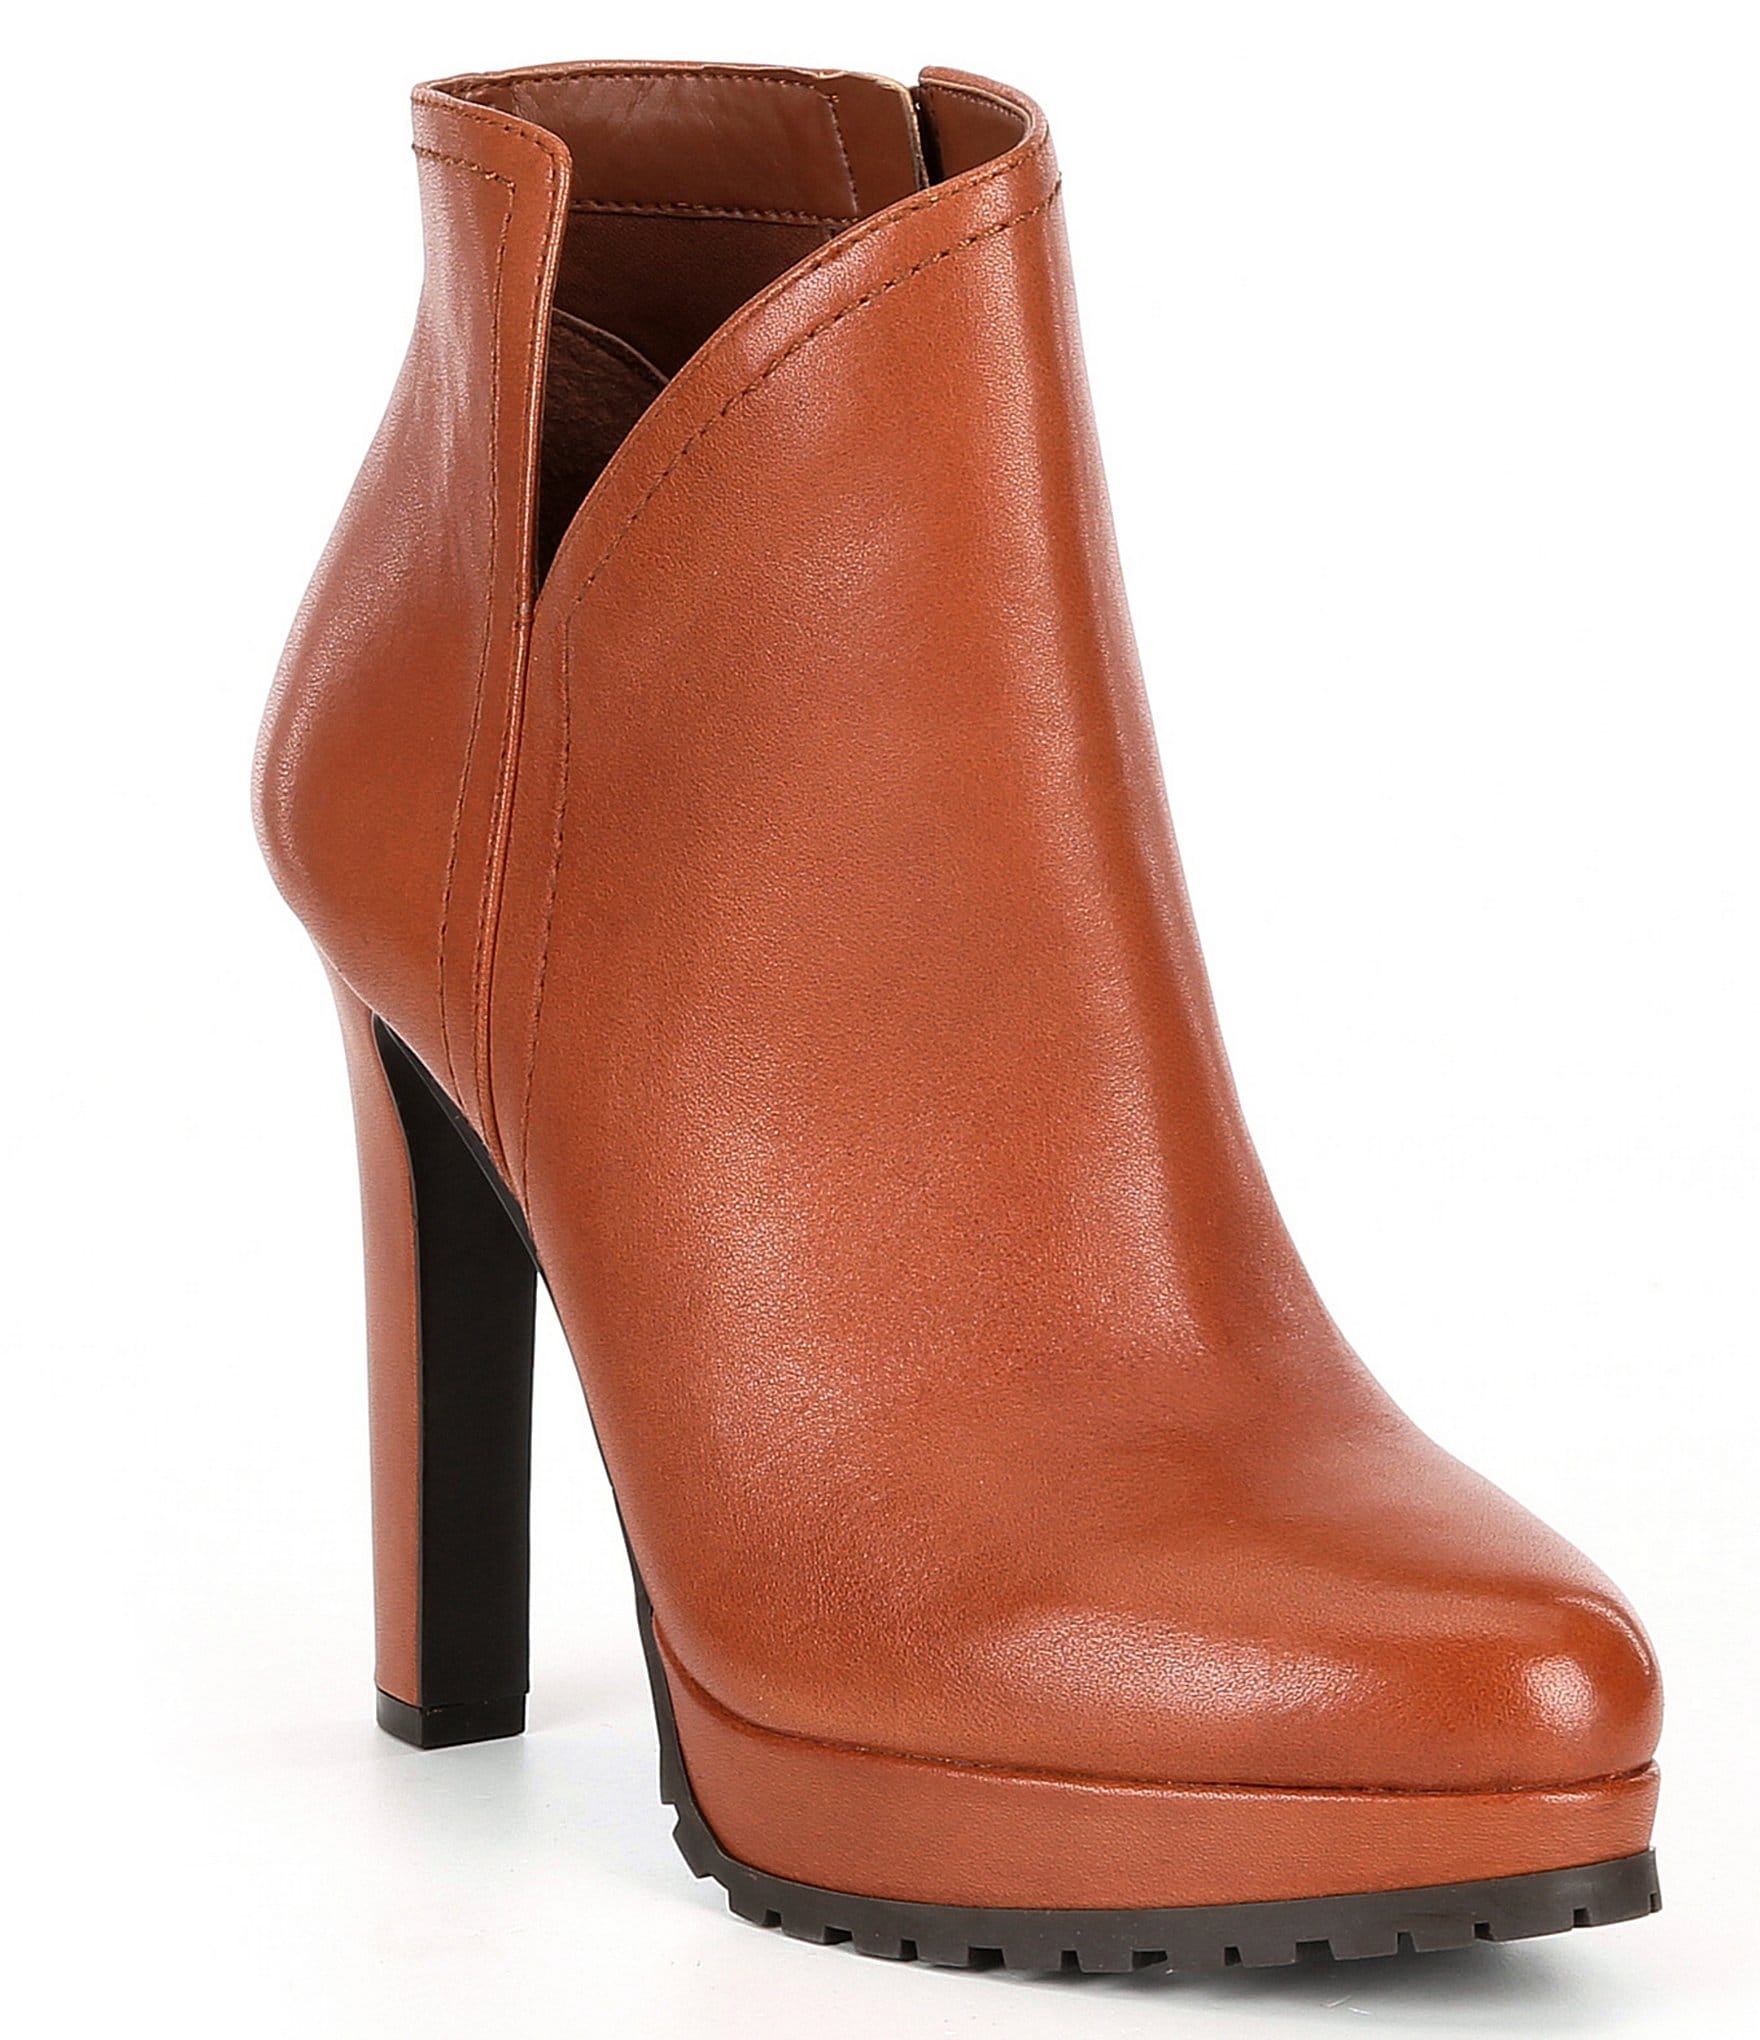 leather dress bootie